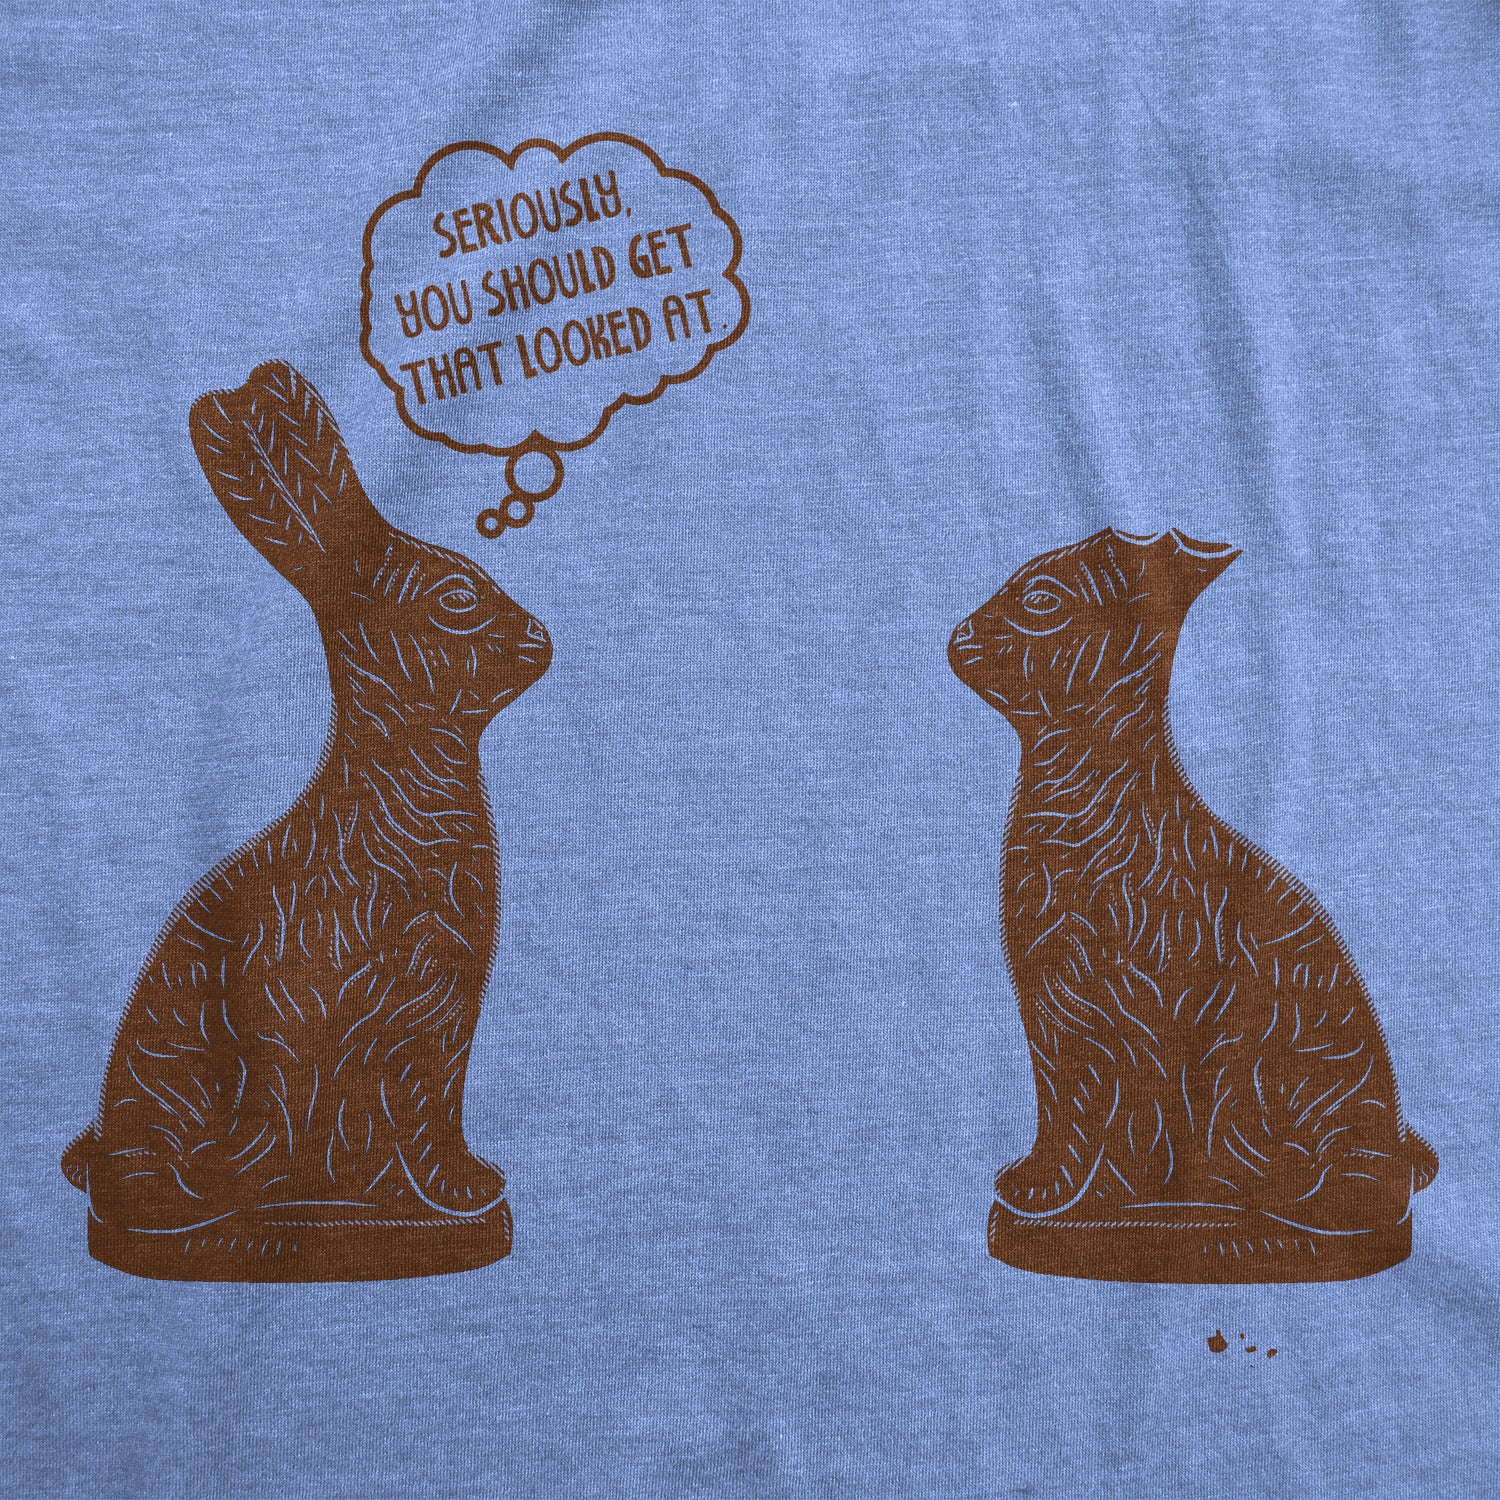 Funny You Should Get That Looked At Mens T Shirt Nerdy Easter Tee